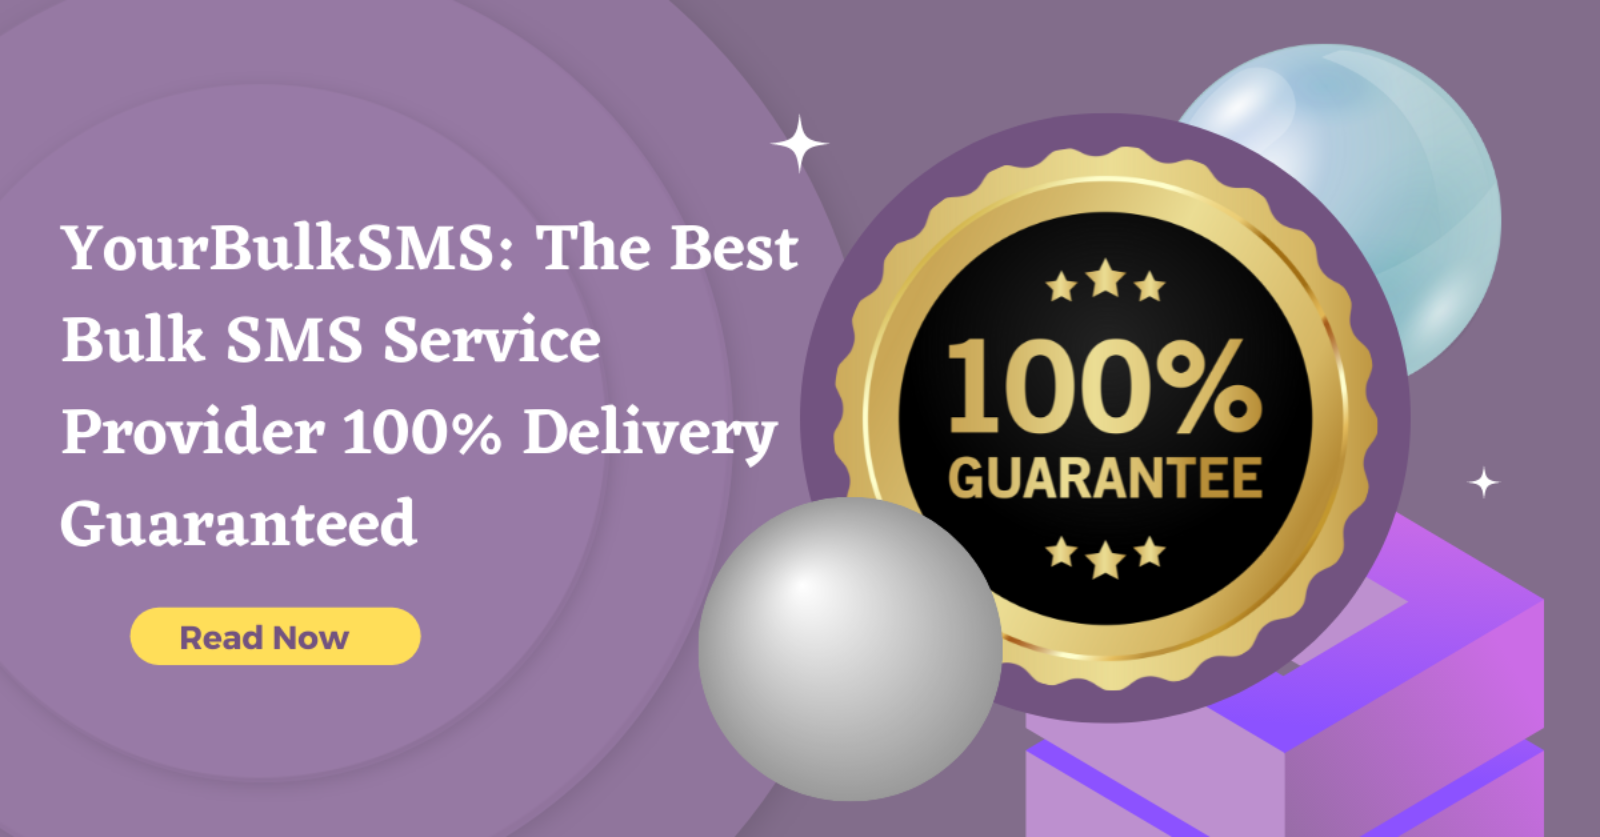 Best Bulk SMS Service Provider 100% Delivery Guaranteed